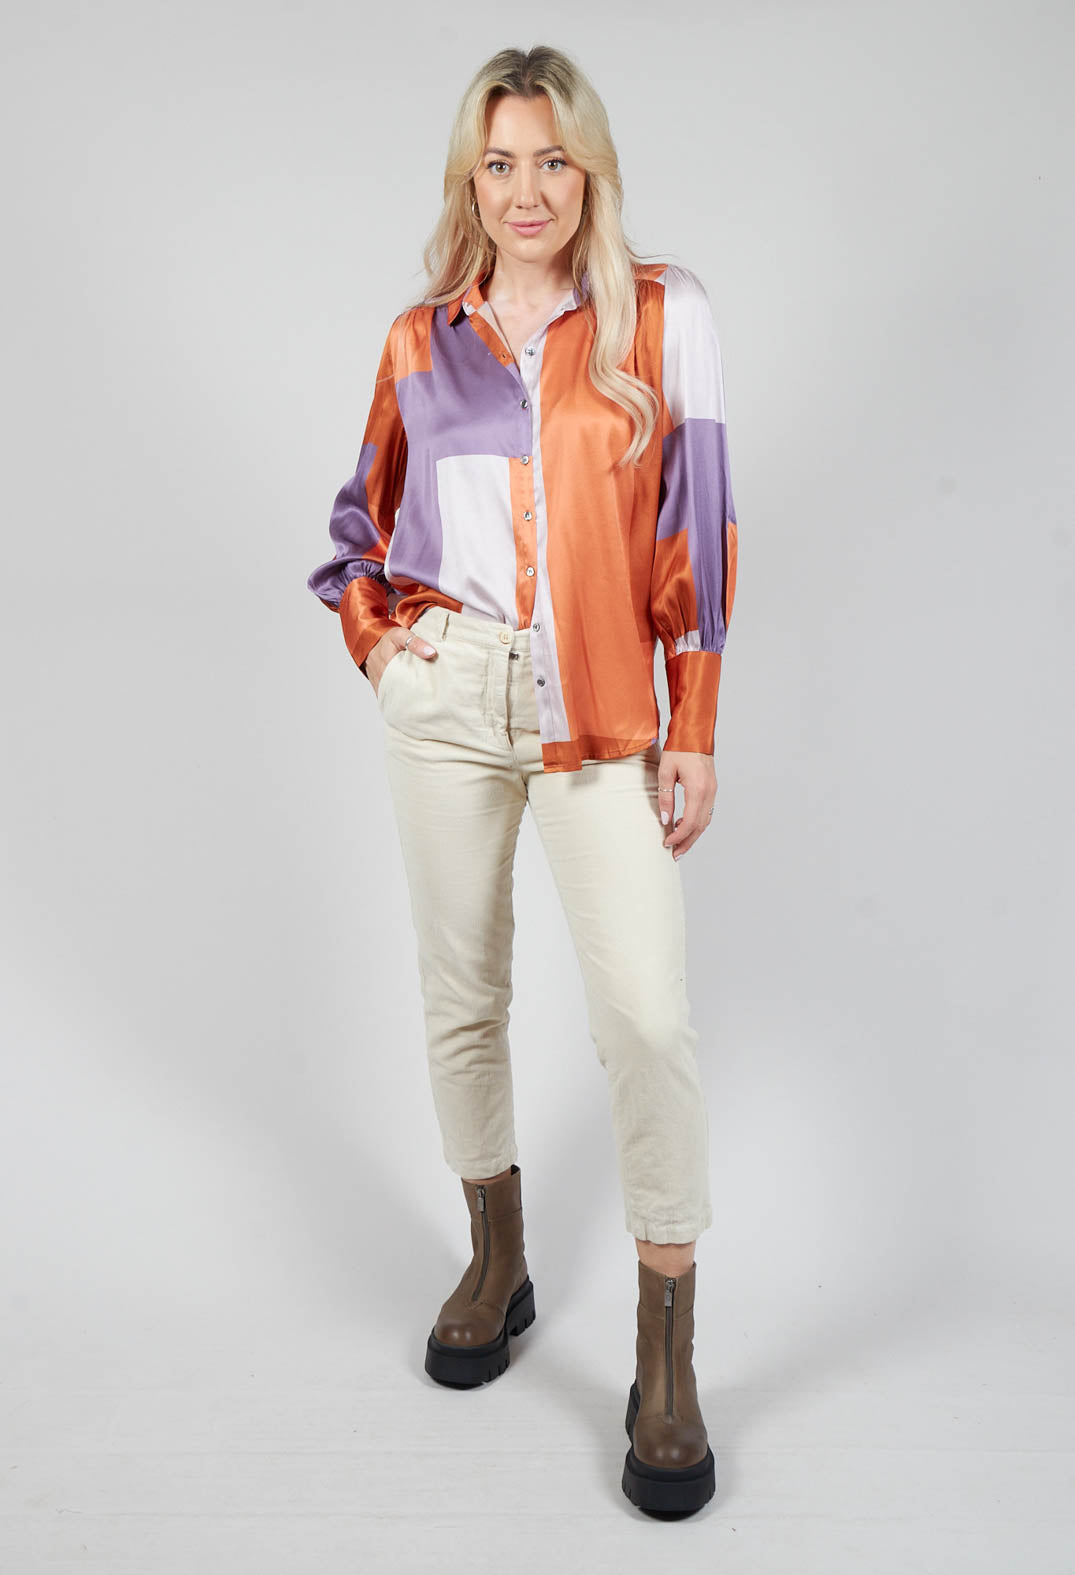 Cadence Shirt with Volume Sleeves in Linear Ultra Violet